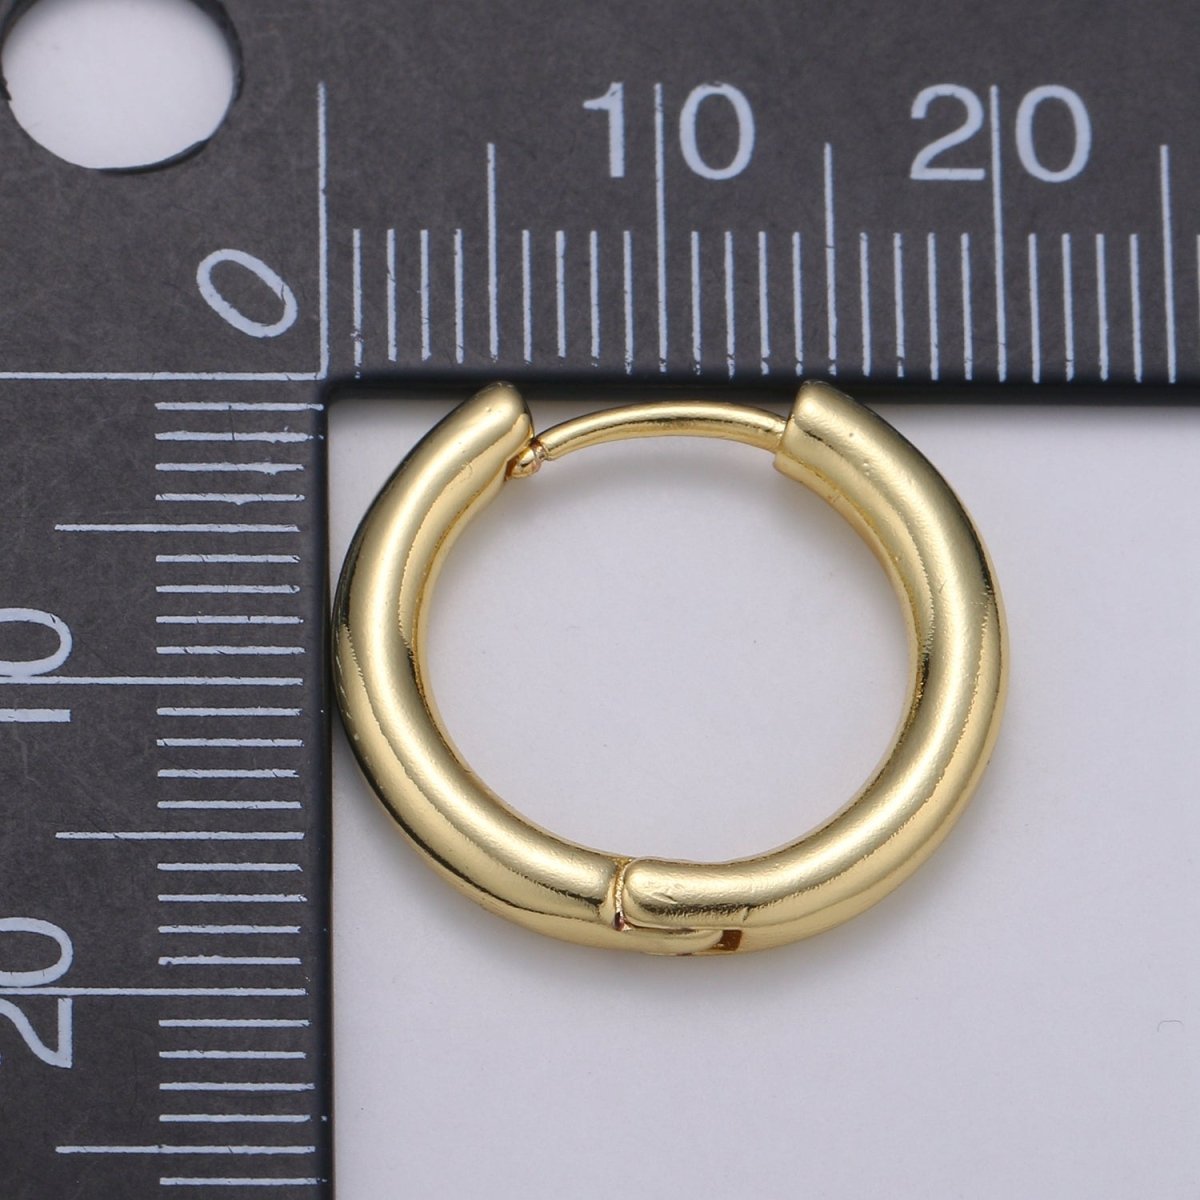 18mm / 20mm 14K Gold Filled Gold Earrings for DIY Earring Craft Supply Jewelry Making Q-404 Q-407 - DLUXCA